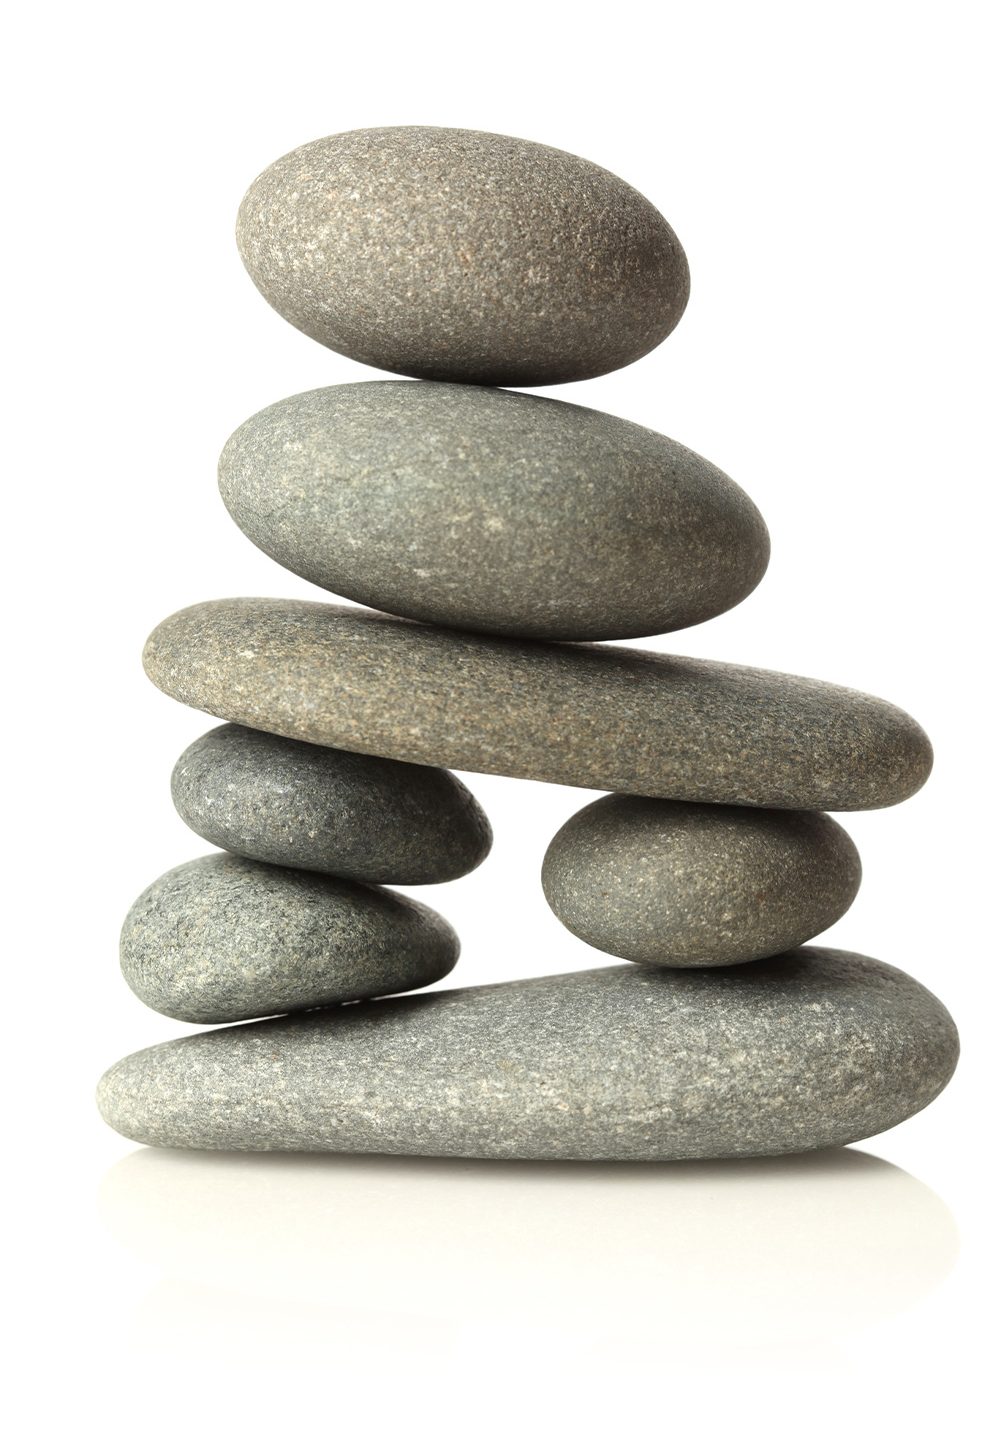 An image of two gently balanced stacked stones working together to hold up an arch.